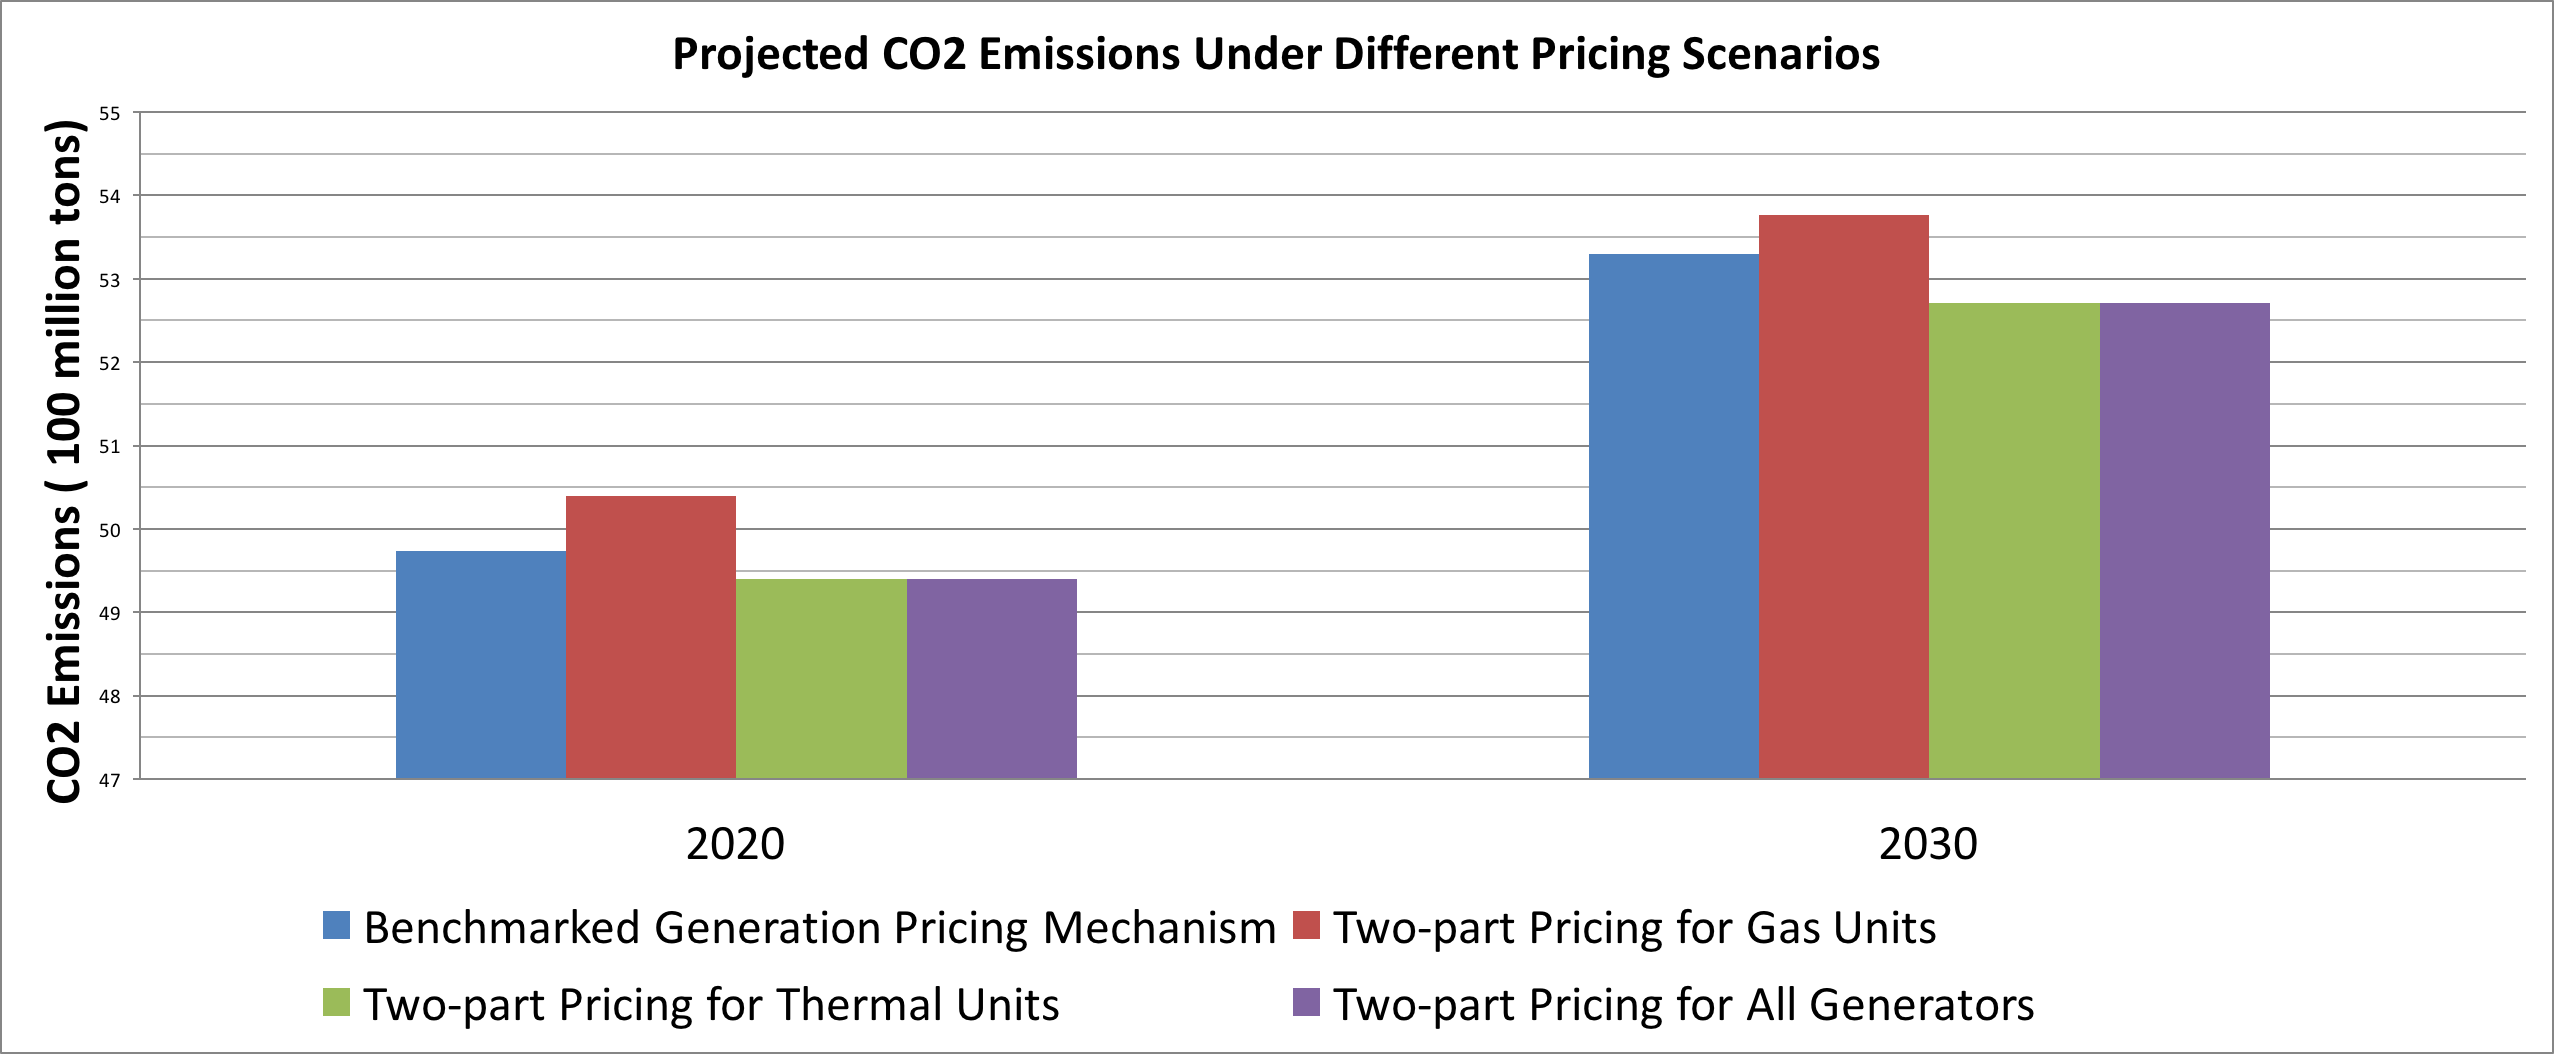 Projected Carbon Emissions Under Different Pricing Scenarios